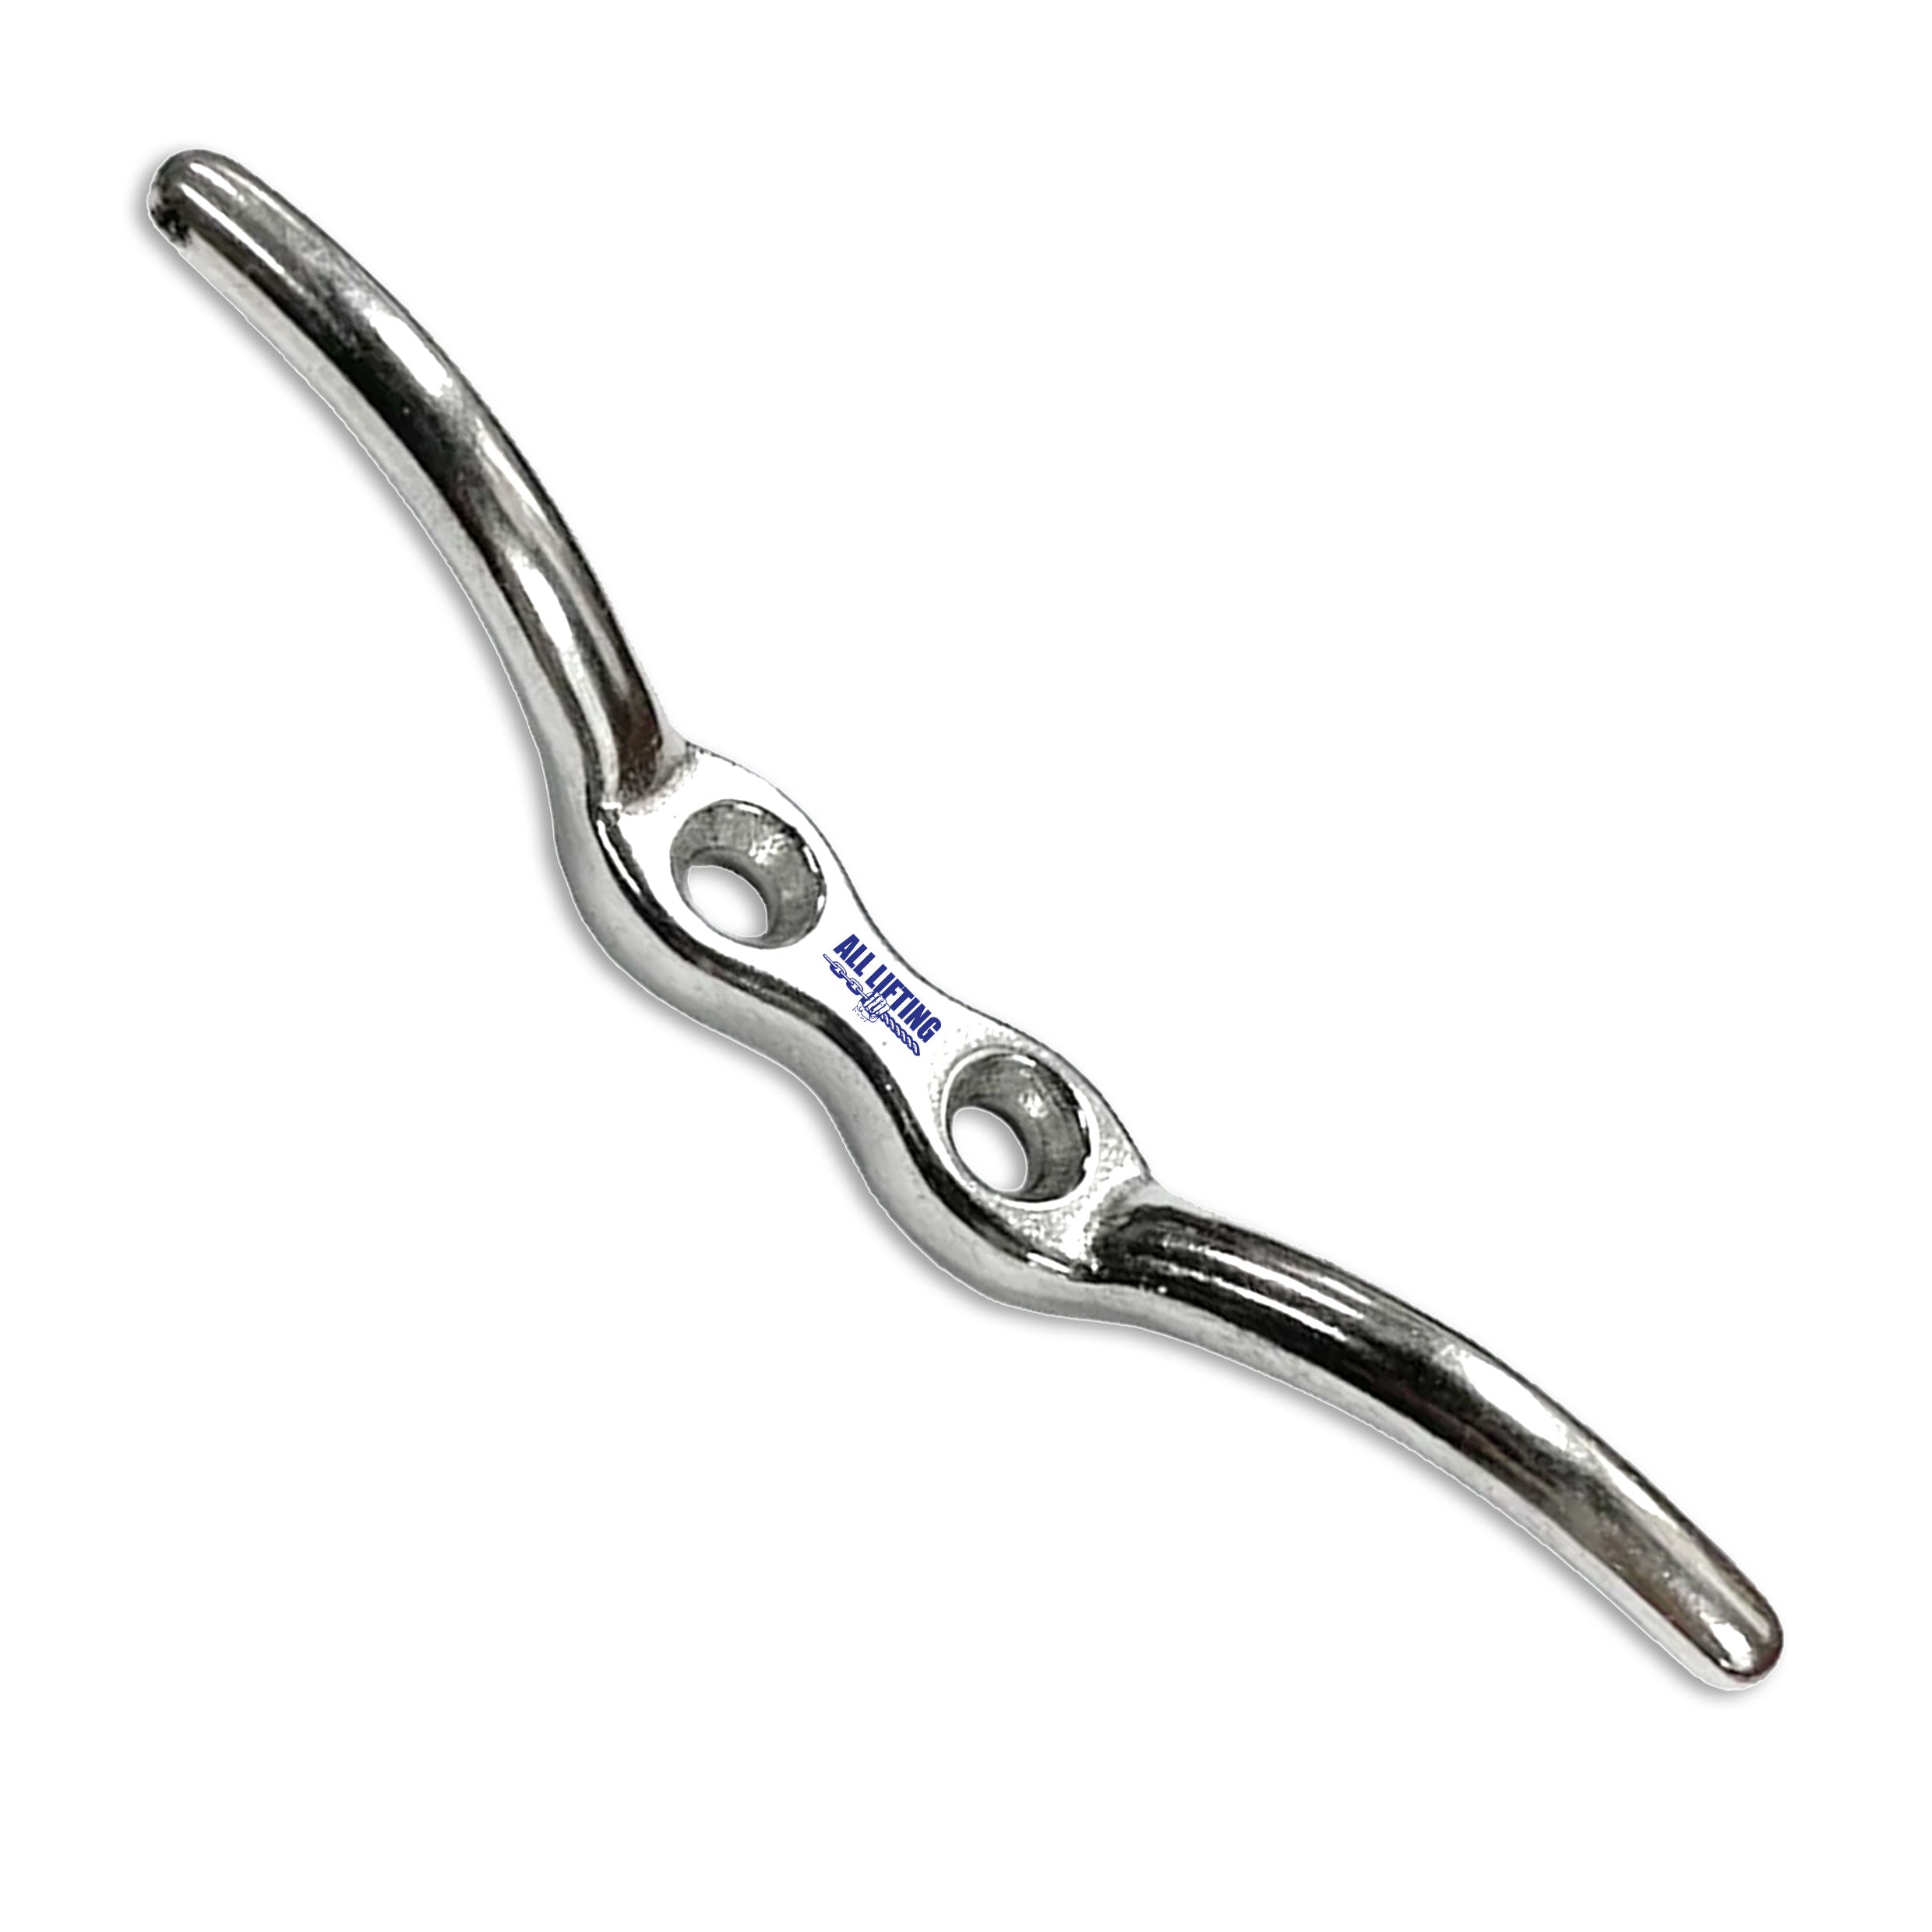 Stainless Steel Rope Cleat, All Lifting